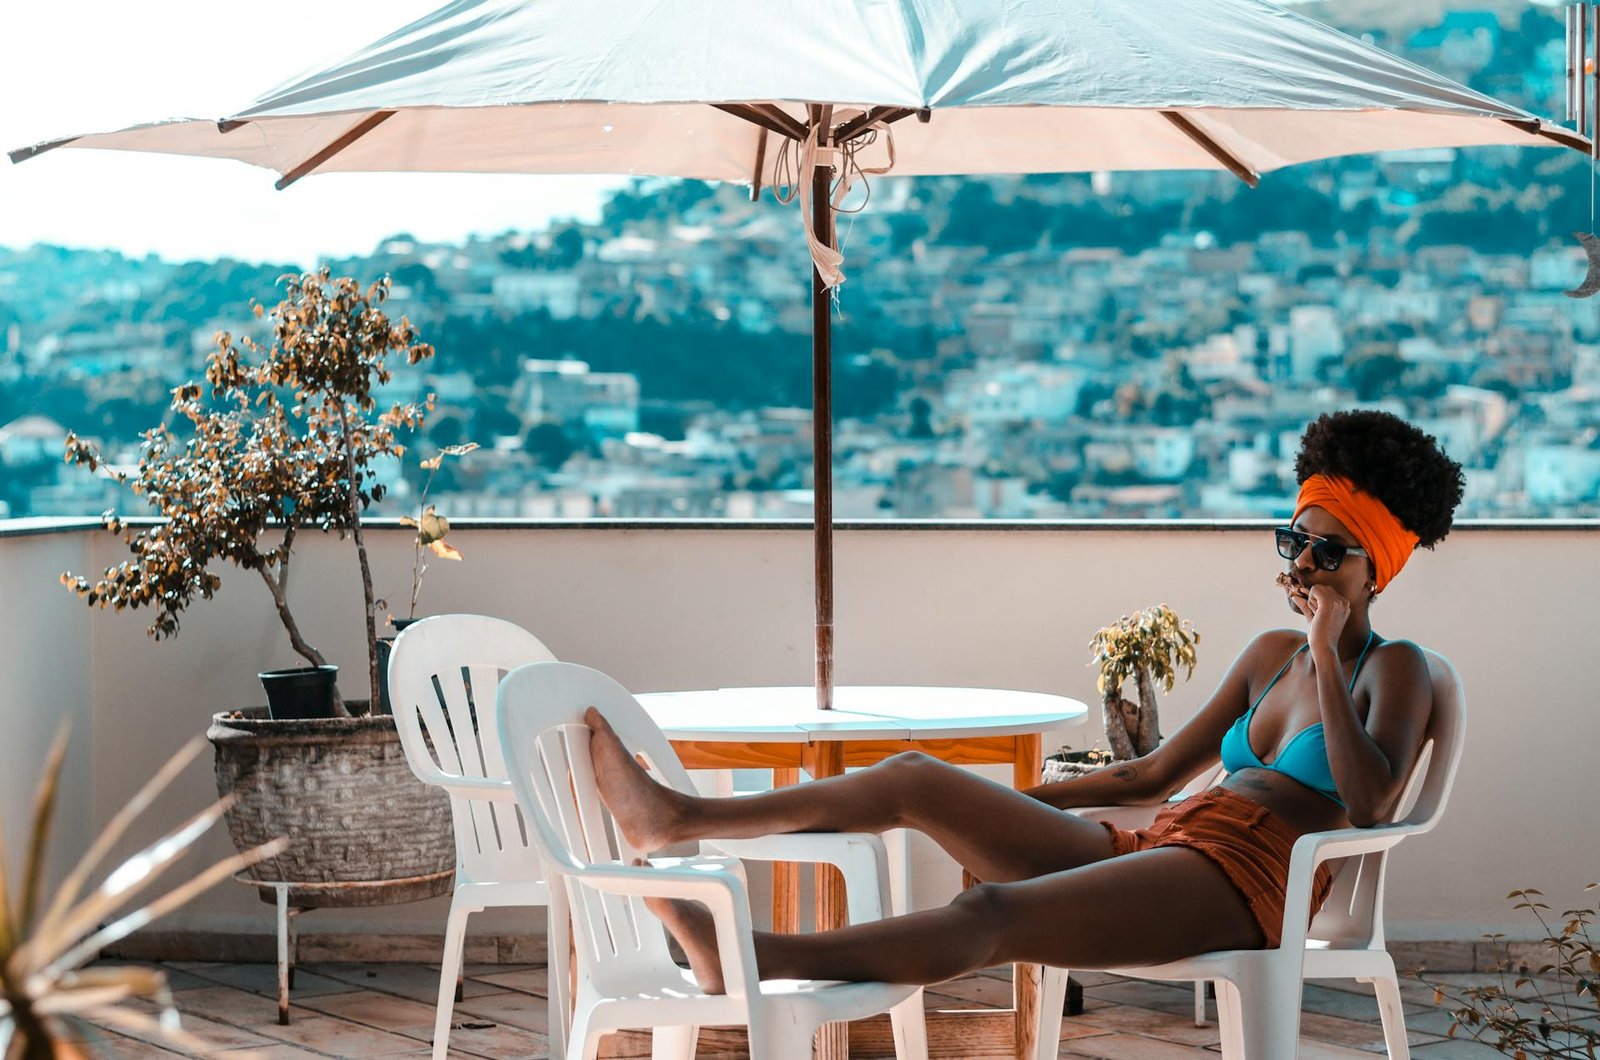 Destinations for solo black female travelers in the US